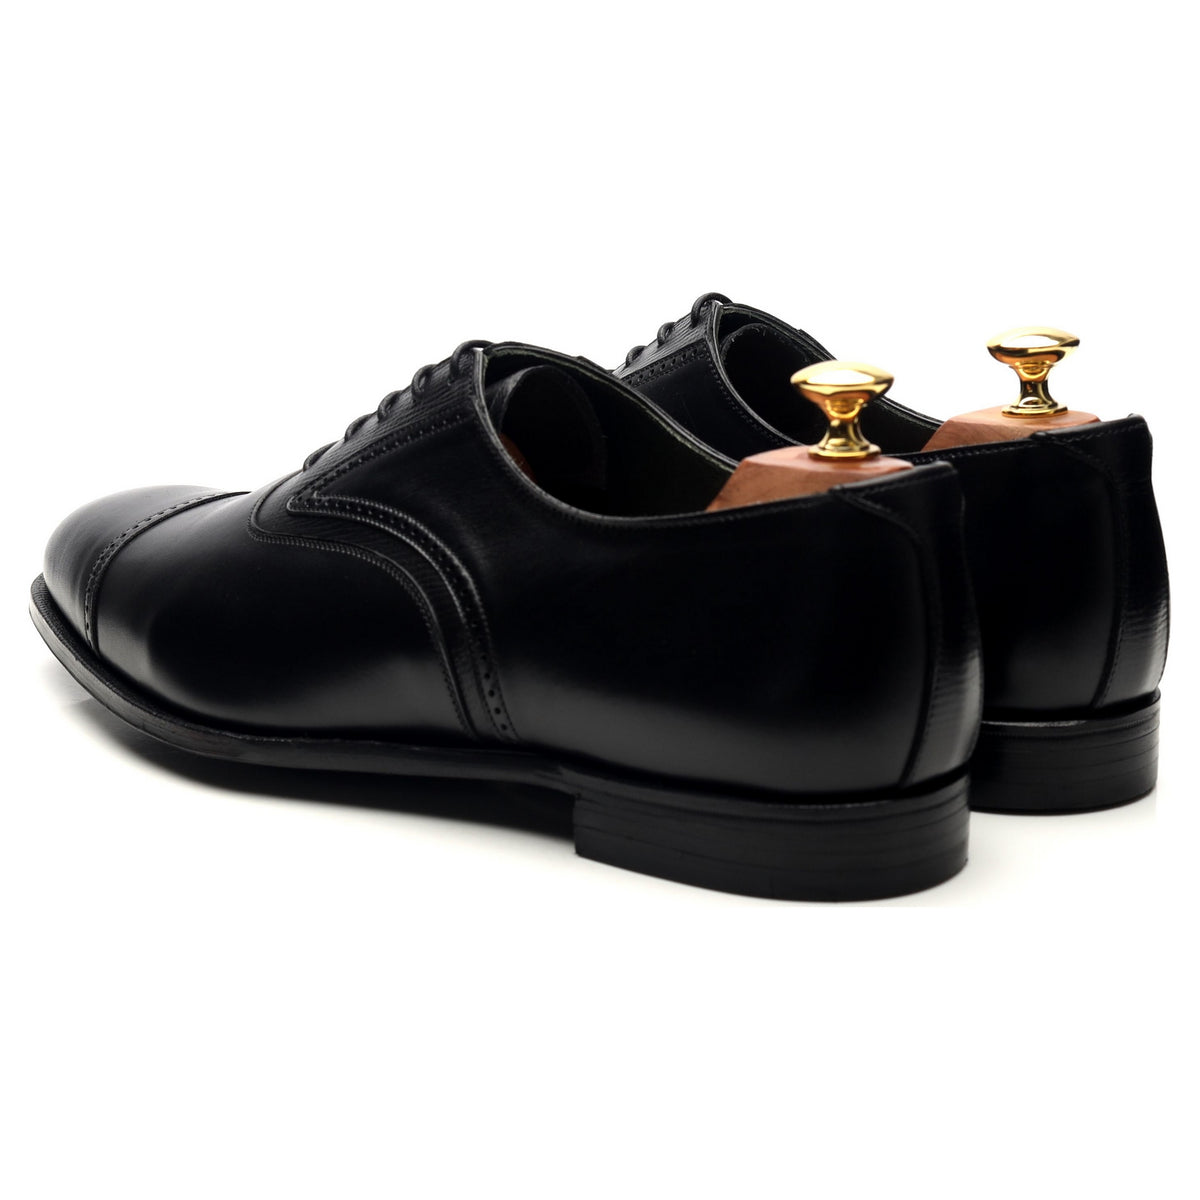 &#39;Perry&#39; Black Leather Oxford Brogues UK 9.5 E